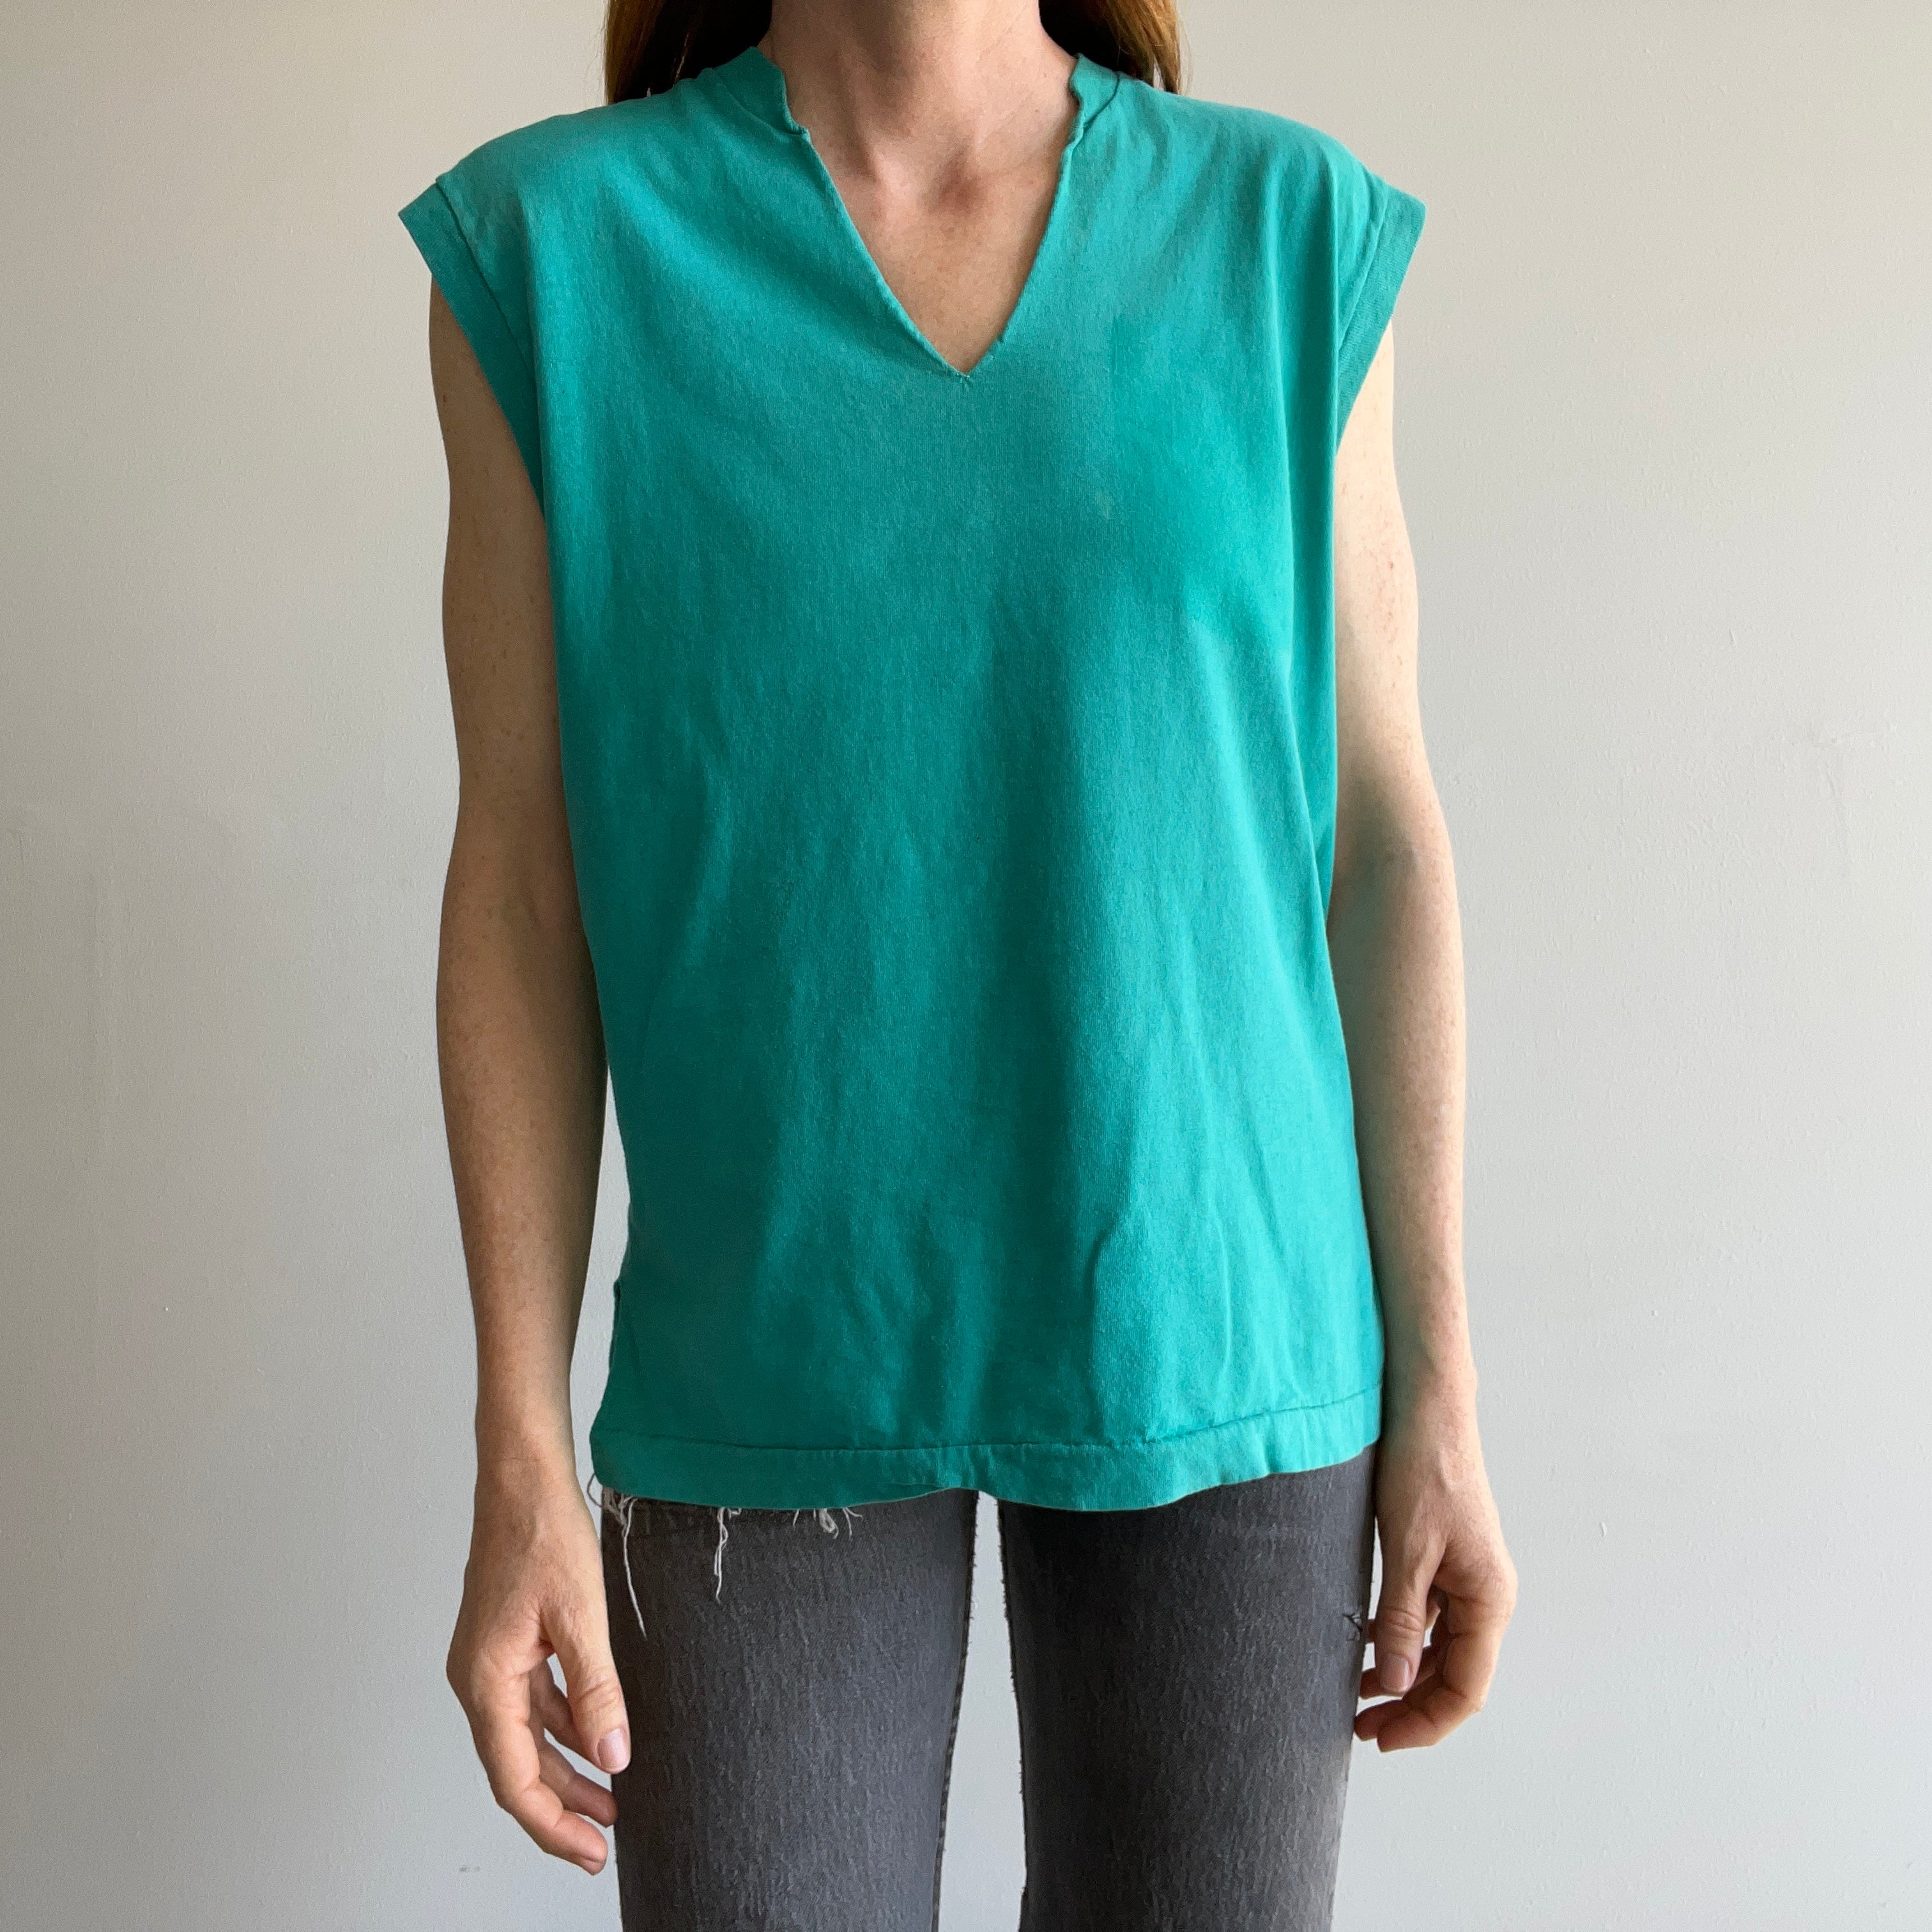 1980s Rad DIY Muscle Tank with the Pocket Removed